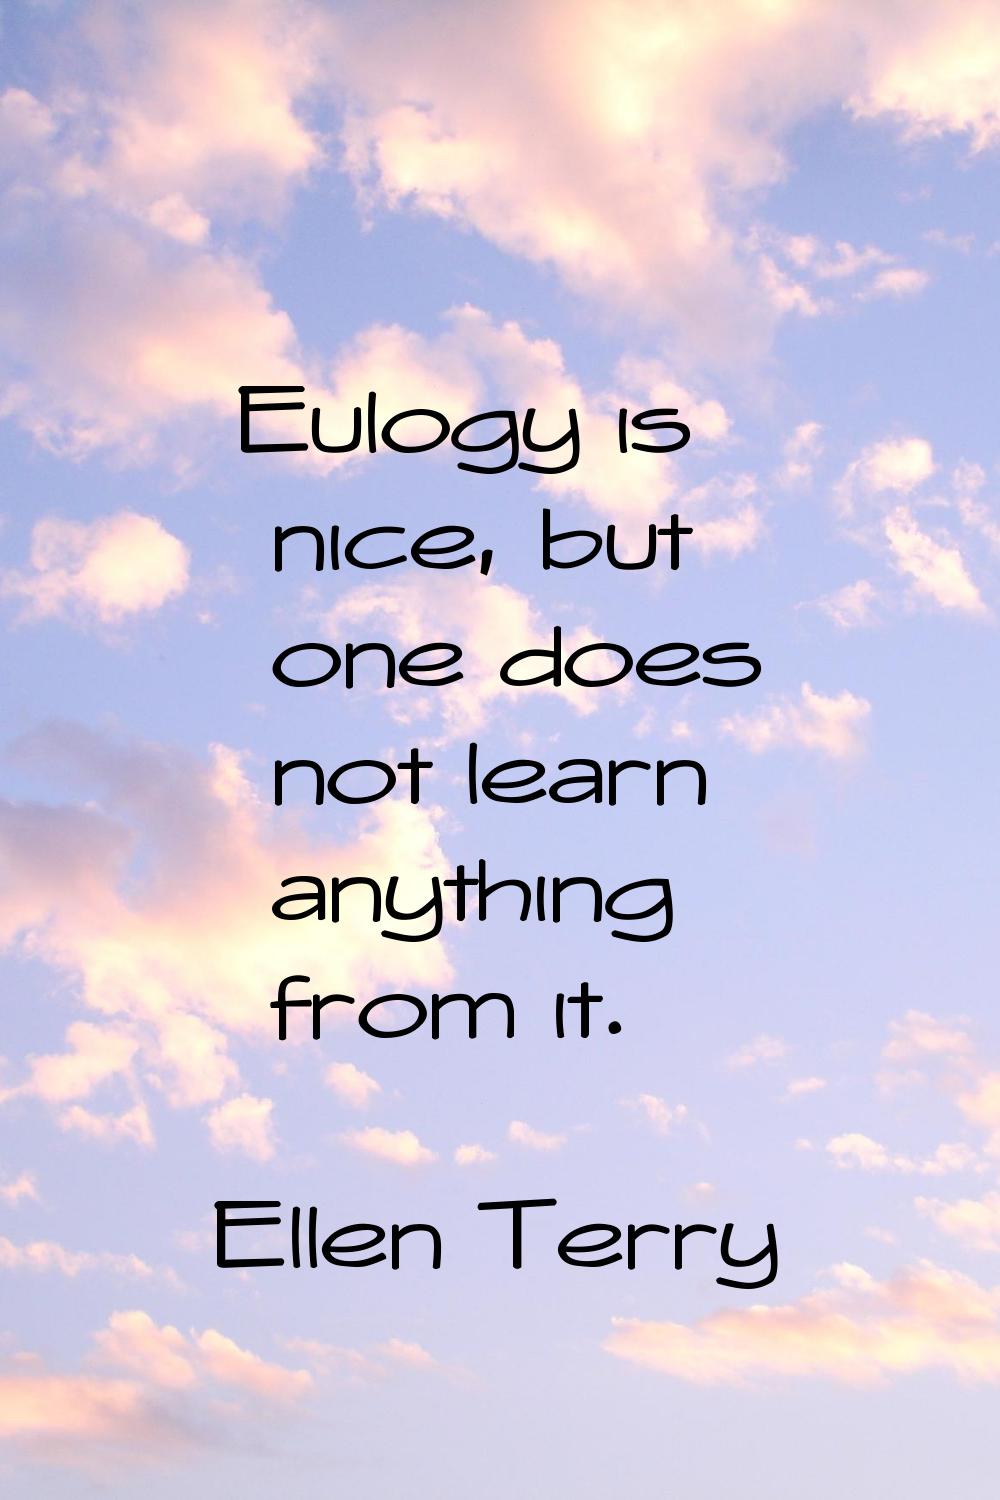 Eulogy is nice, but one does not learn anything from it.